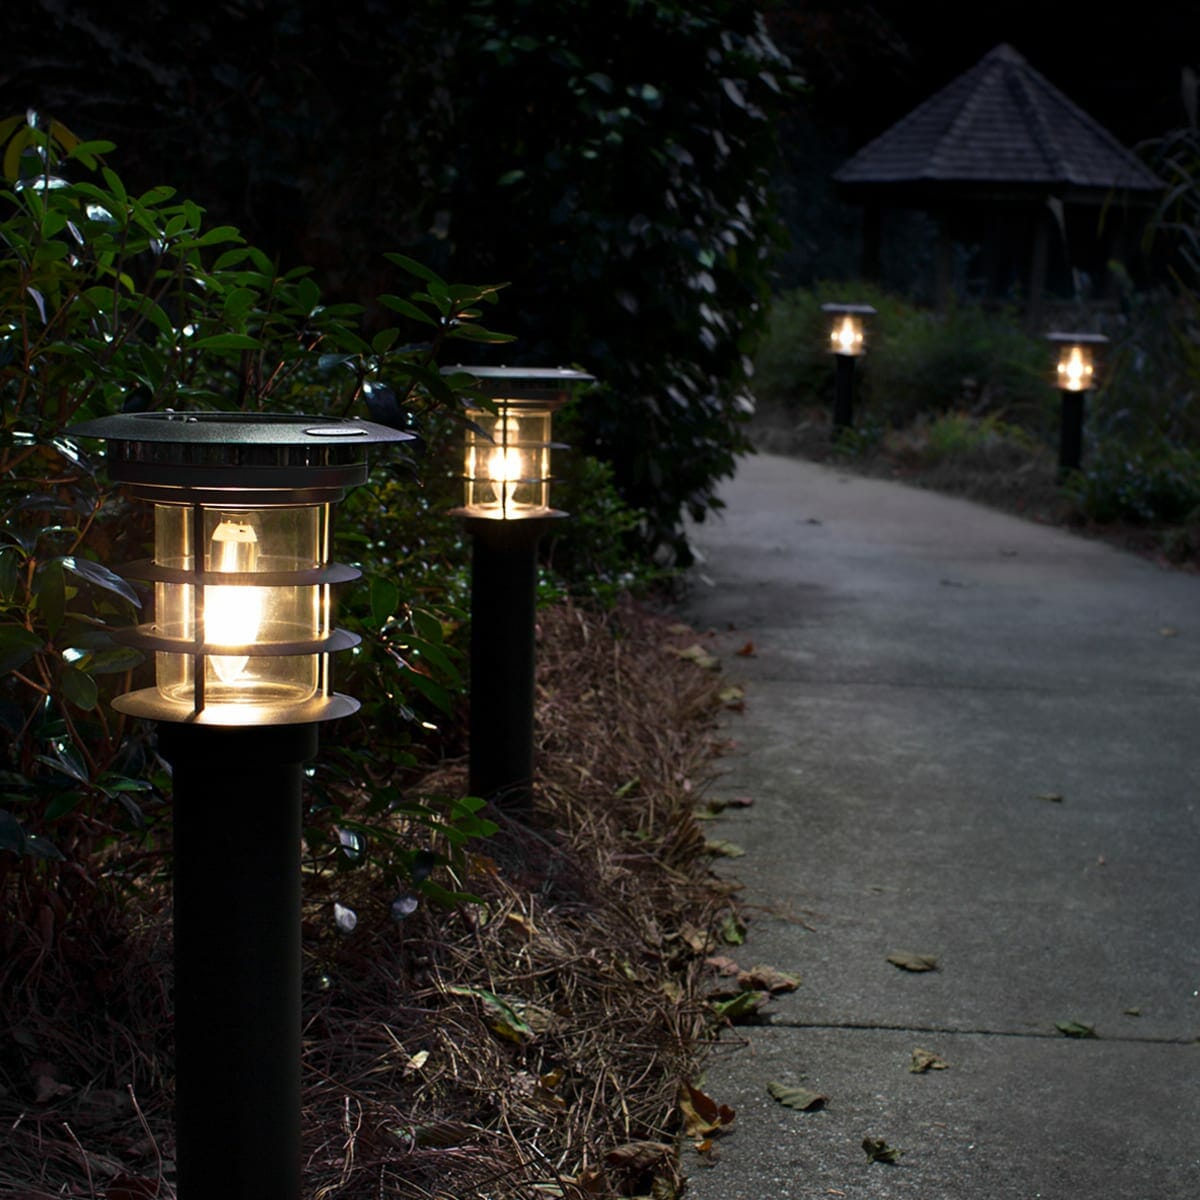 Lumens Do You Need For Outdoor Lighting, What Is The Best Lumen For Outdoor Lights